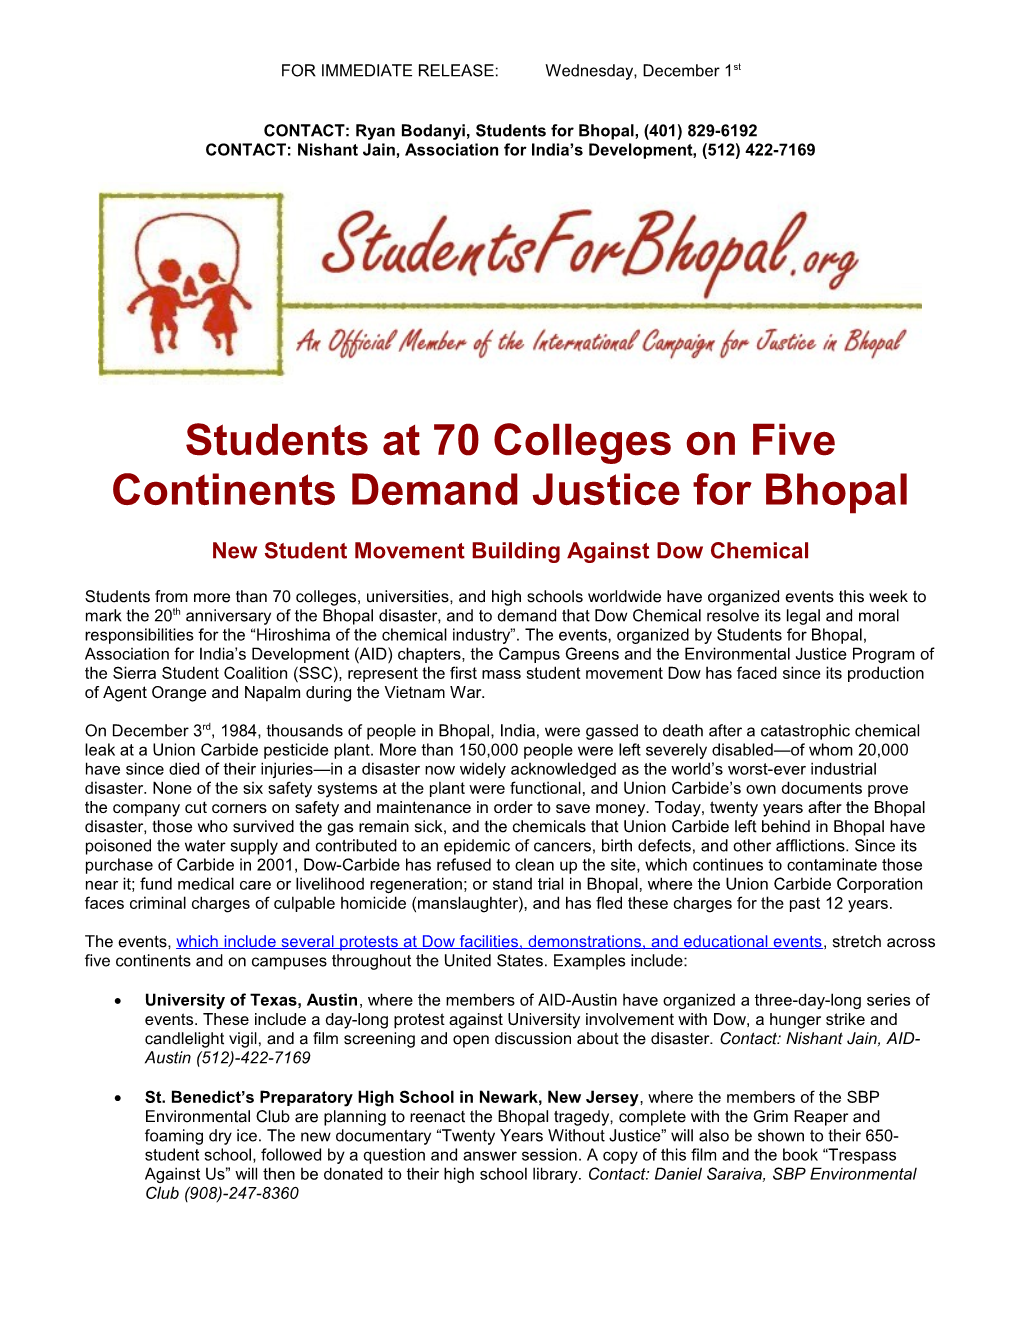 CONTACT: Ryan Bodanyi, Students for Bhopal, (401) 829-6192